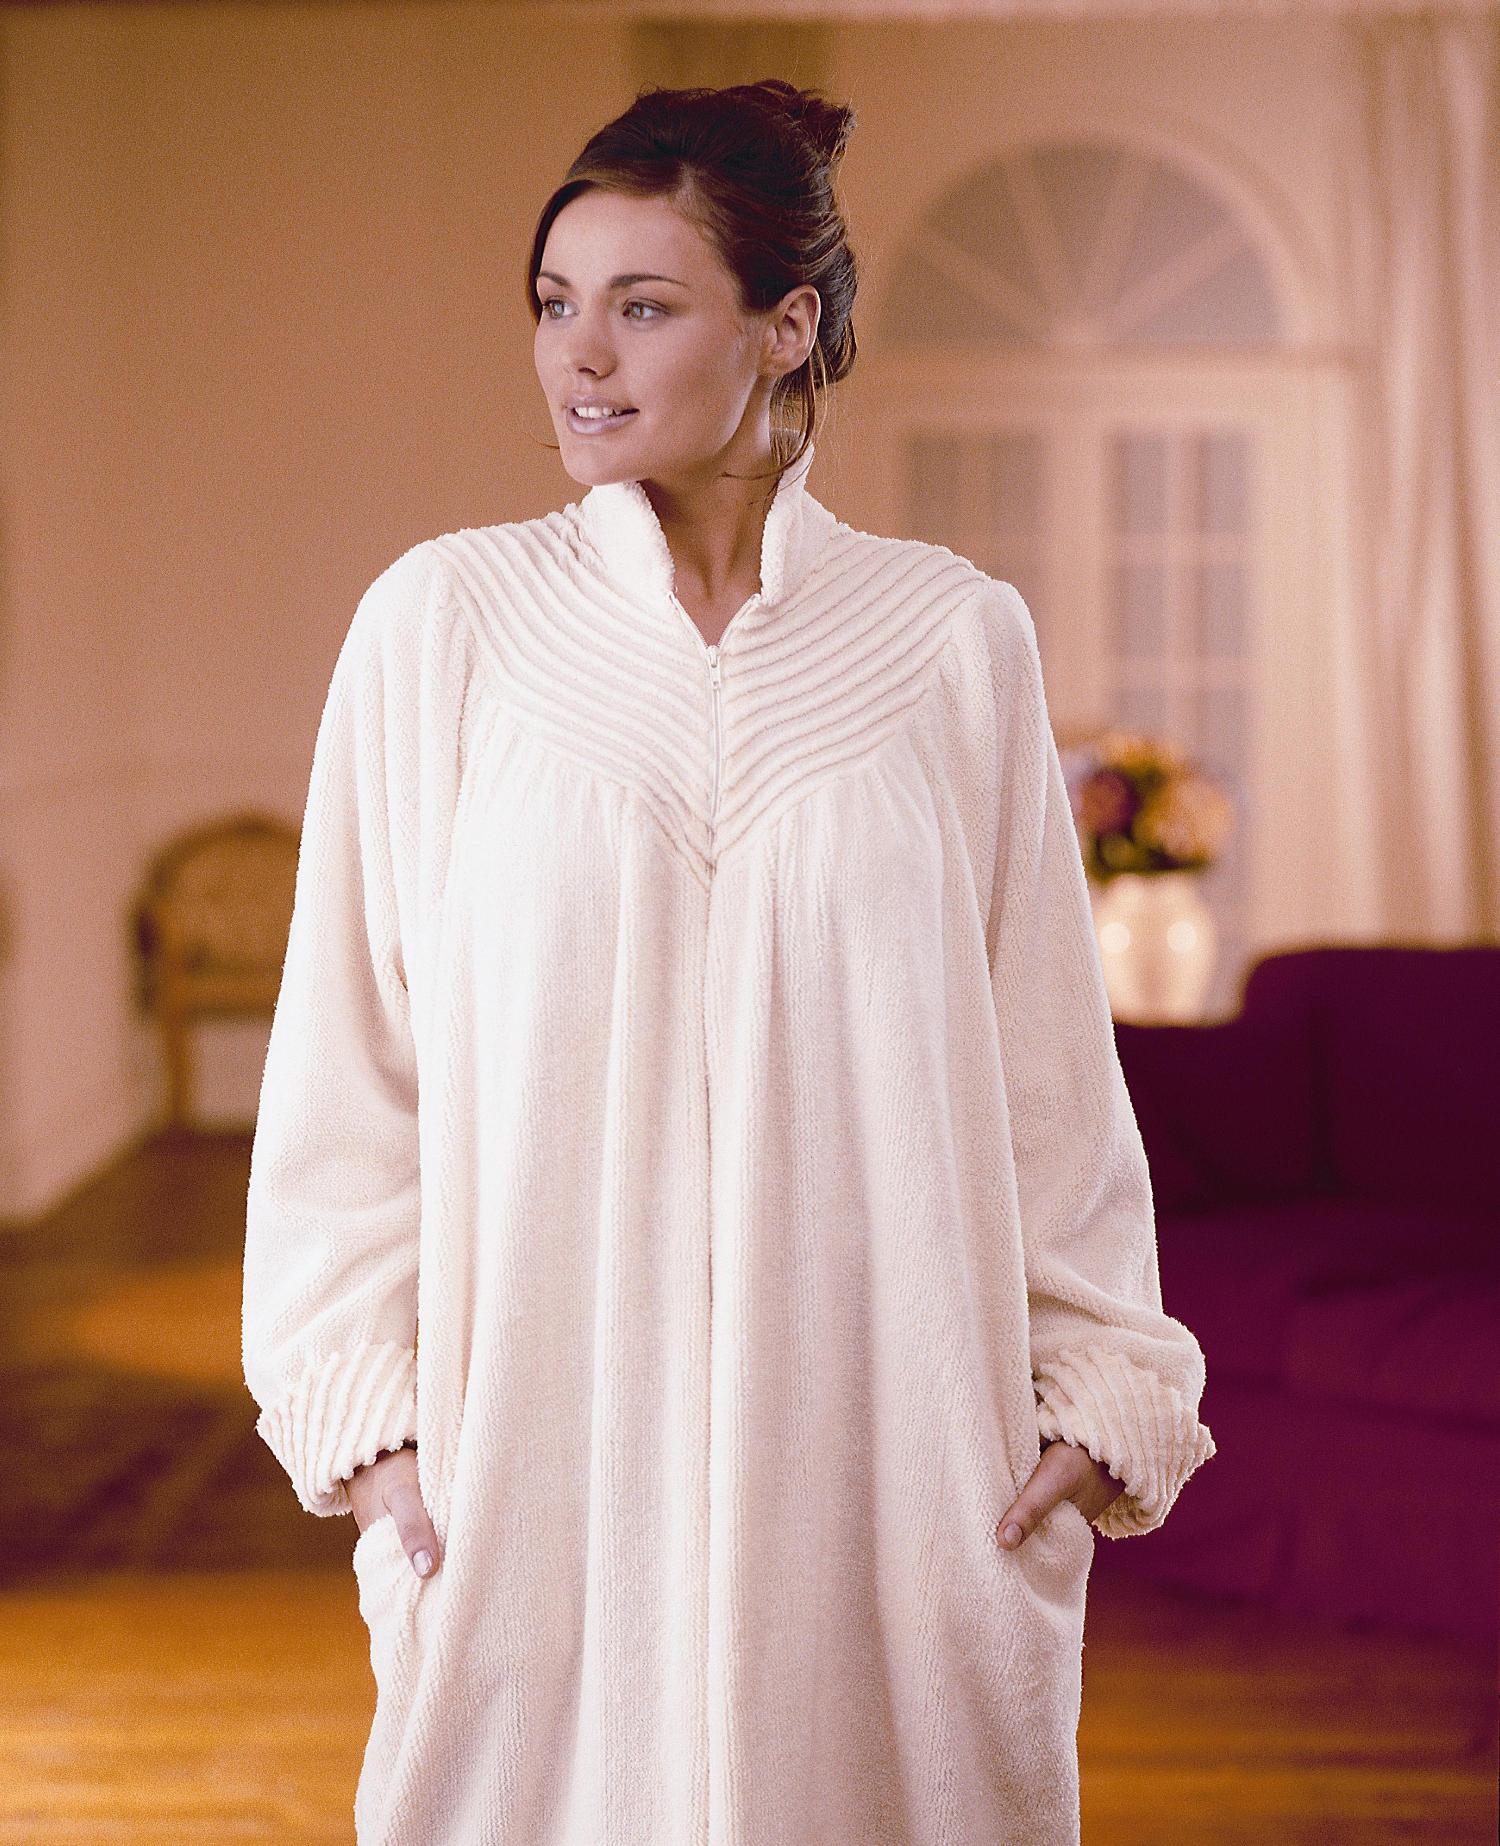 Dressing Gowns, Robes, Luxury Fleece, Kaftans & Nightware Clothing Fashions  - Buy Online Dressing Gowns and Robes